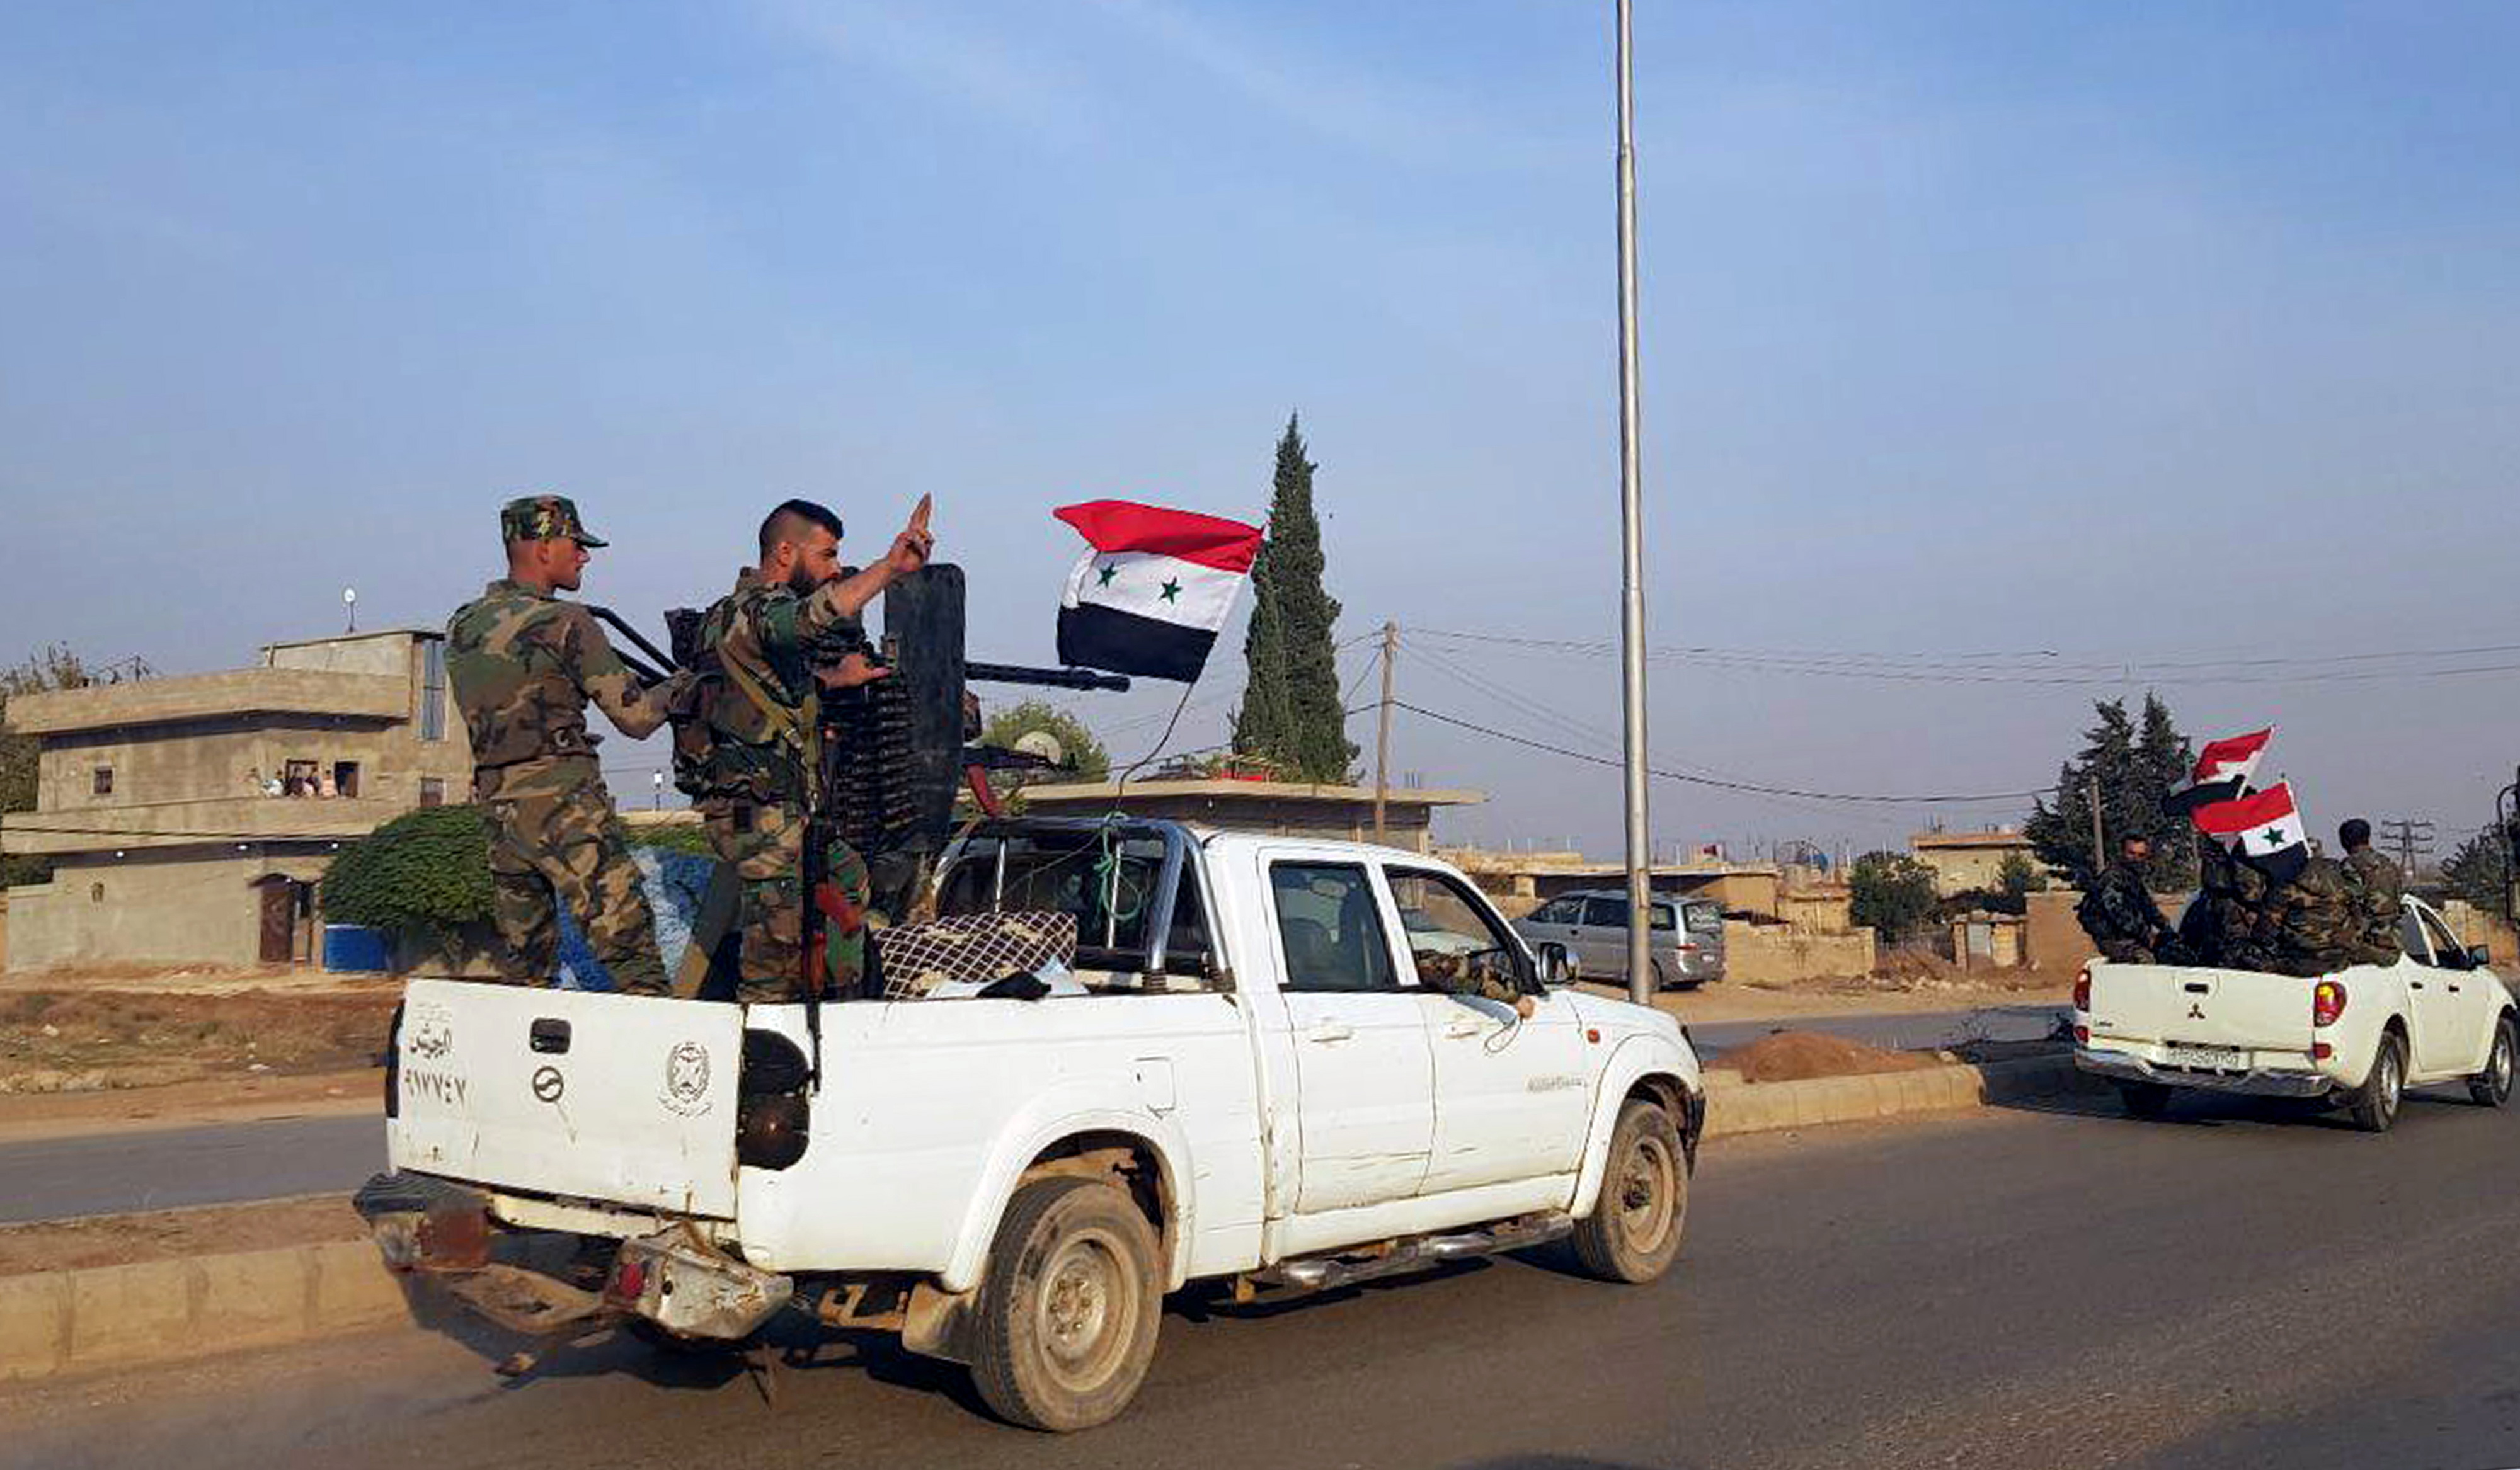 epa07996017 A handout photo made available by the official Syrian Arab News Agency (SANA) shows Syrian soldiers deploying along the Turkish border from al-Jawadiyah to al-Malkiyah in the northeastern countryside of al-Hasaka province in northeast Syria, 14 November 2019. According to Sana, border guards would deploy on Six points at a length of 60 kms along the borders.  EPA/SANA HANDOUT BEST QUALITY AVAILABLE HANDOUT EDITORIAL USE ONLY/NO SALES